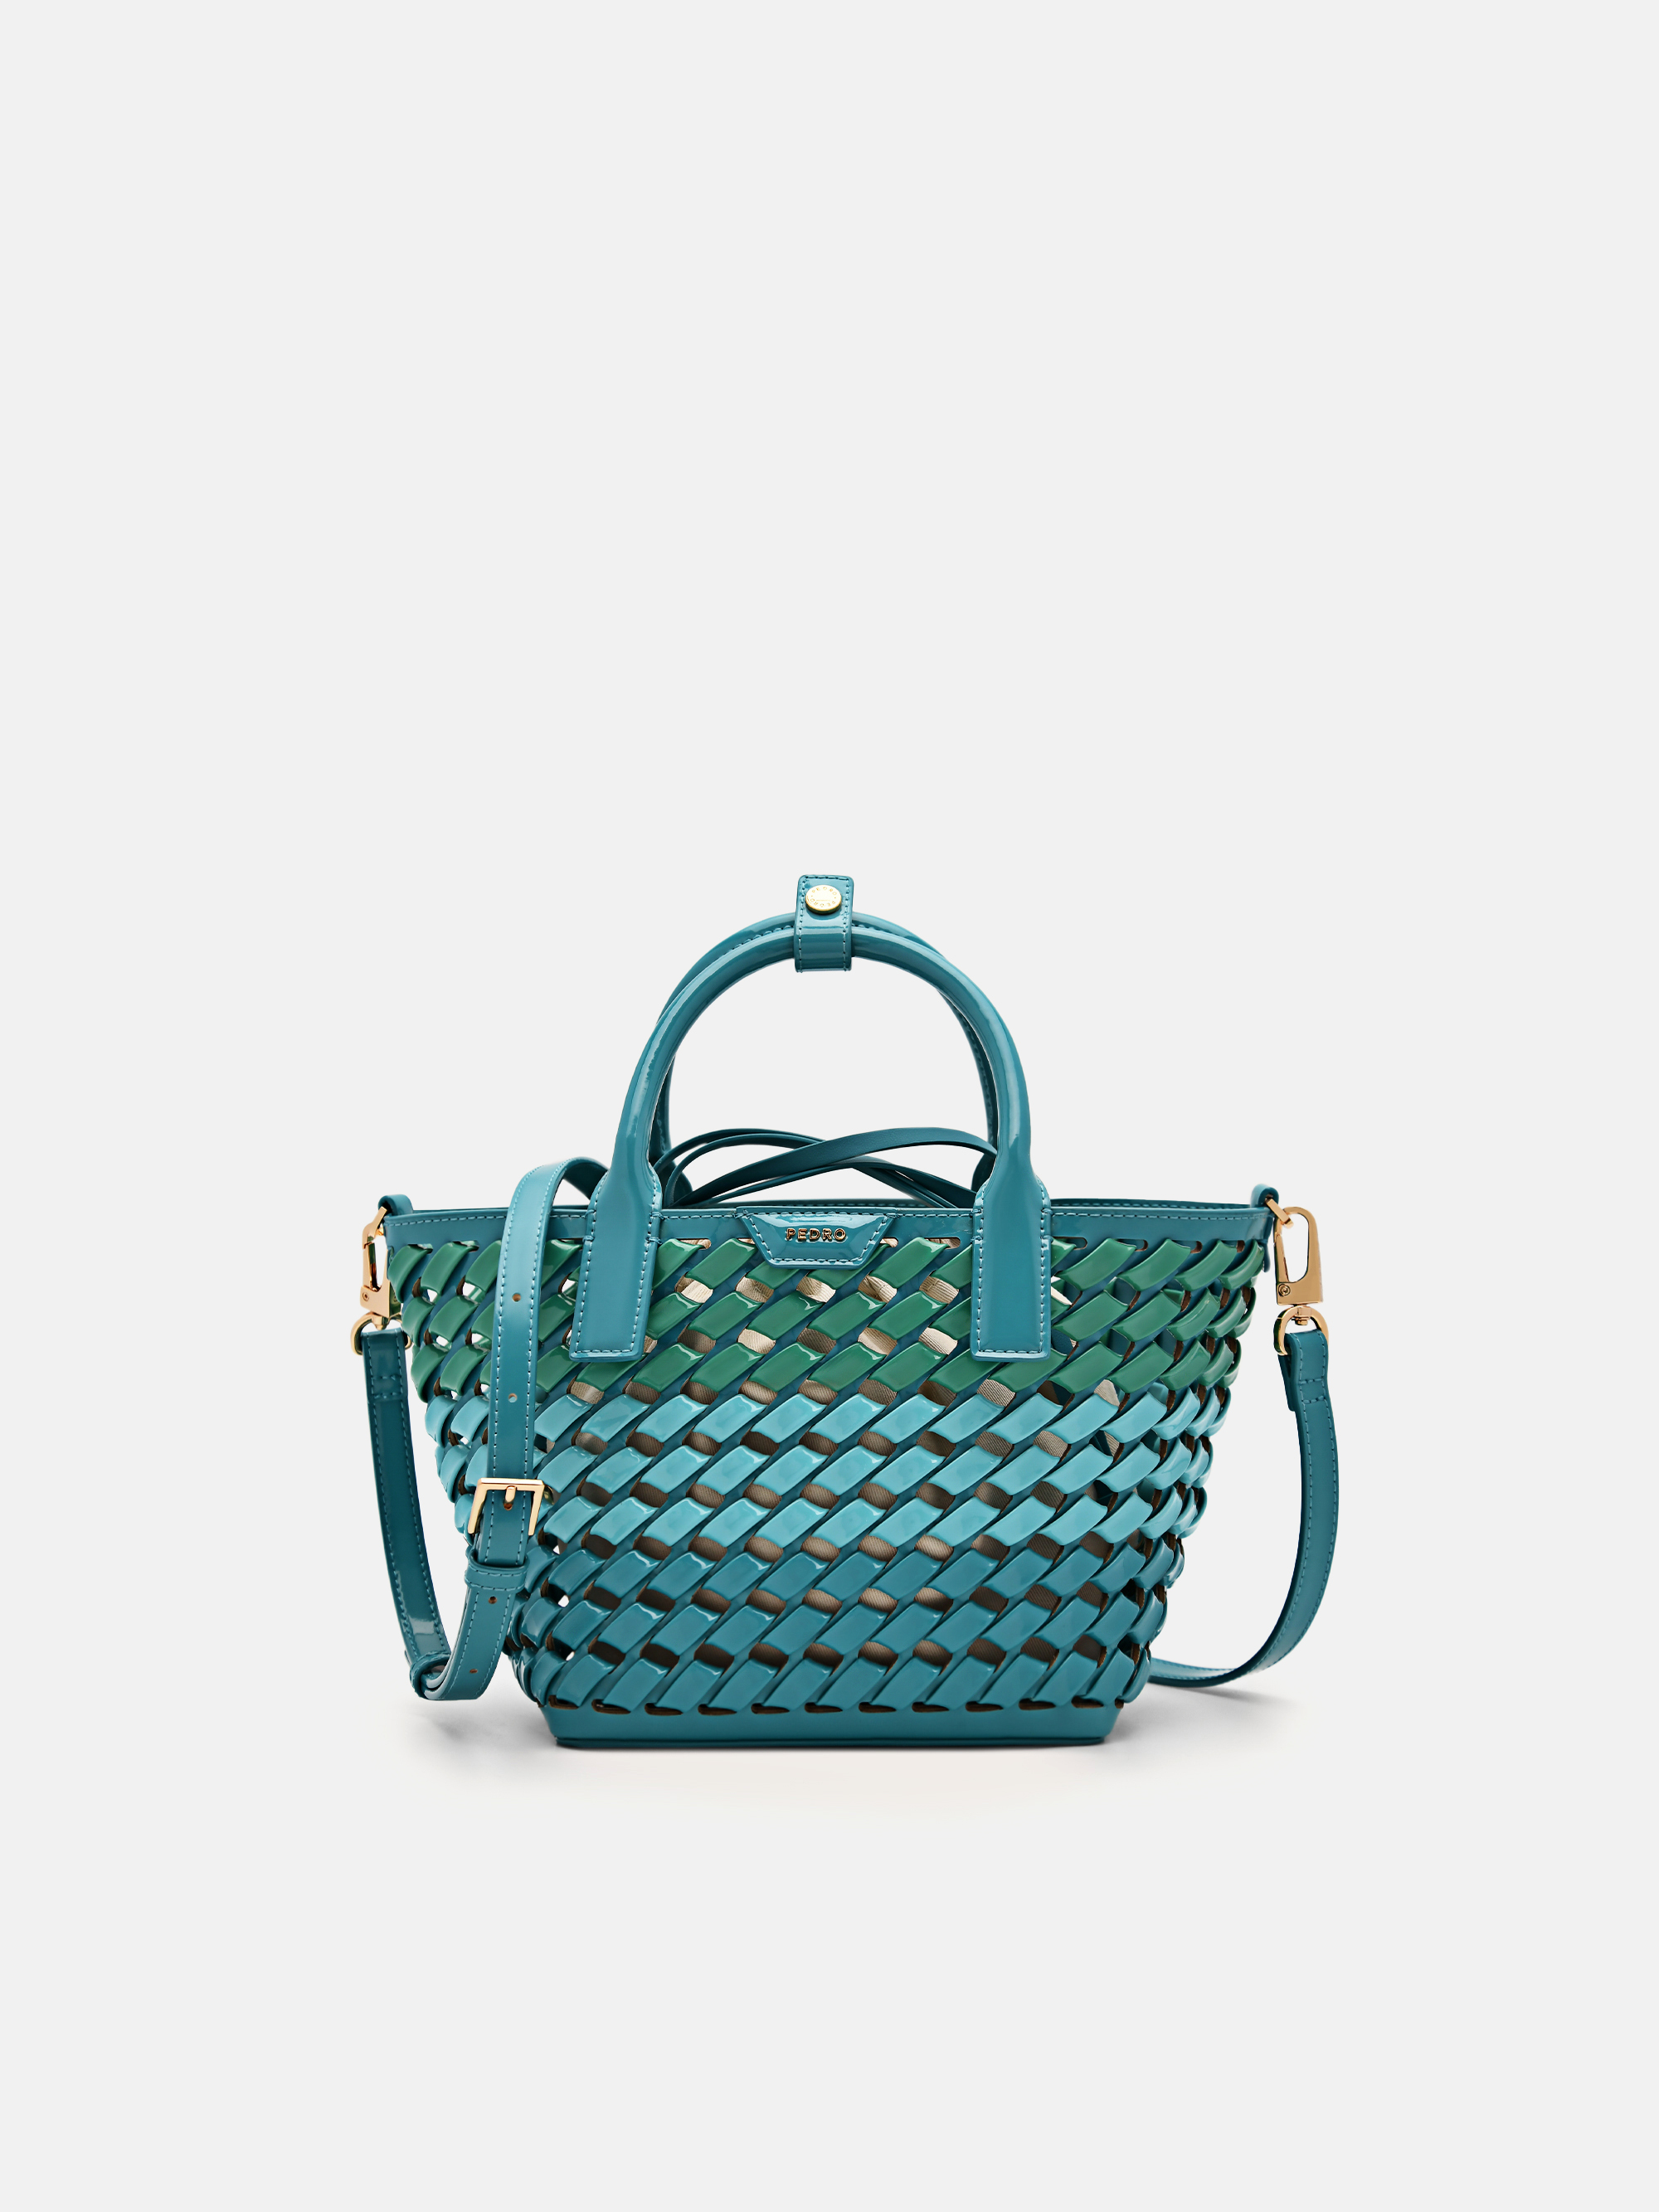 Woven Faux Leather Tote by Anthropologie in Green, Women's